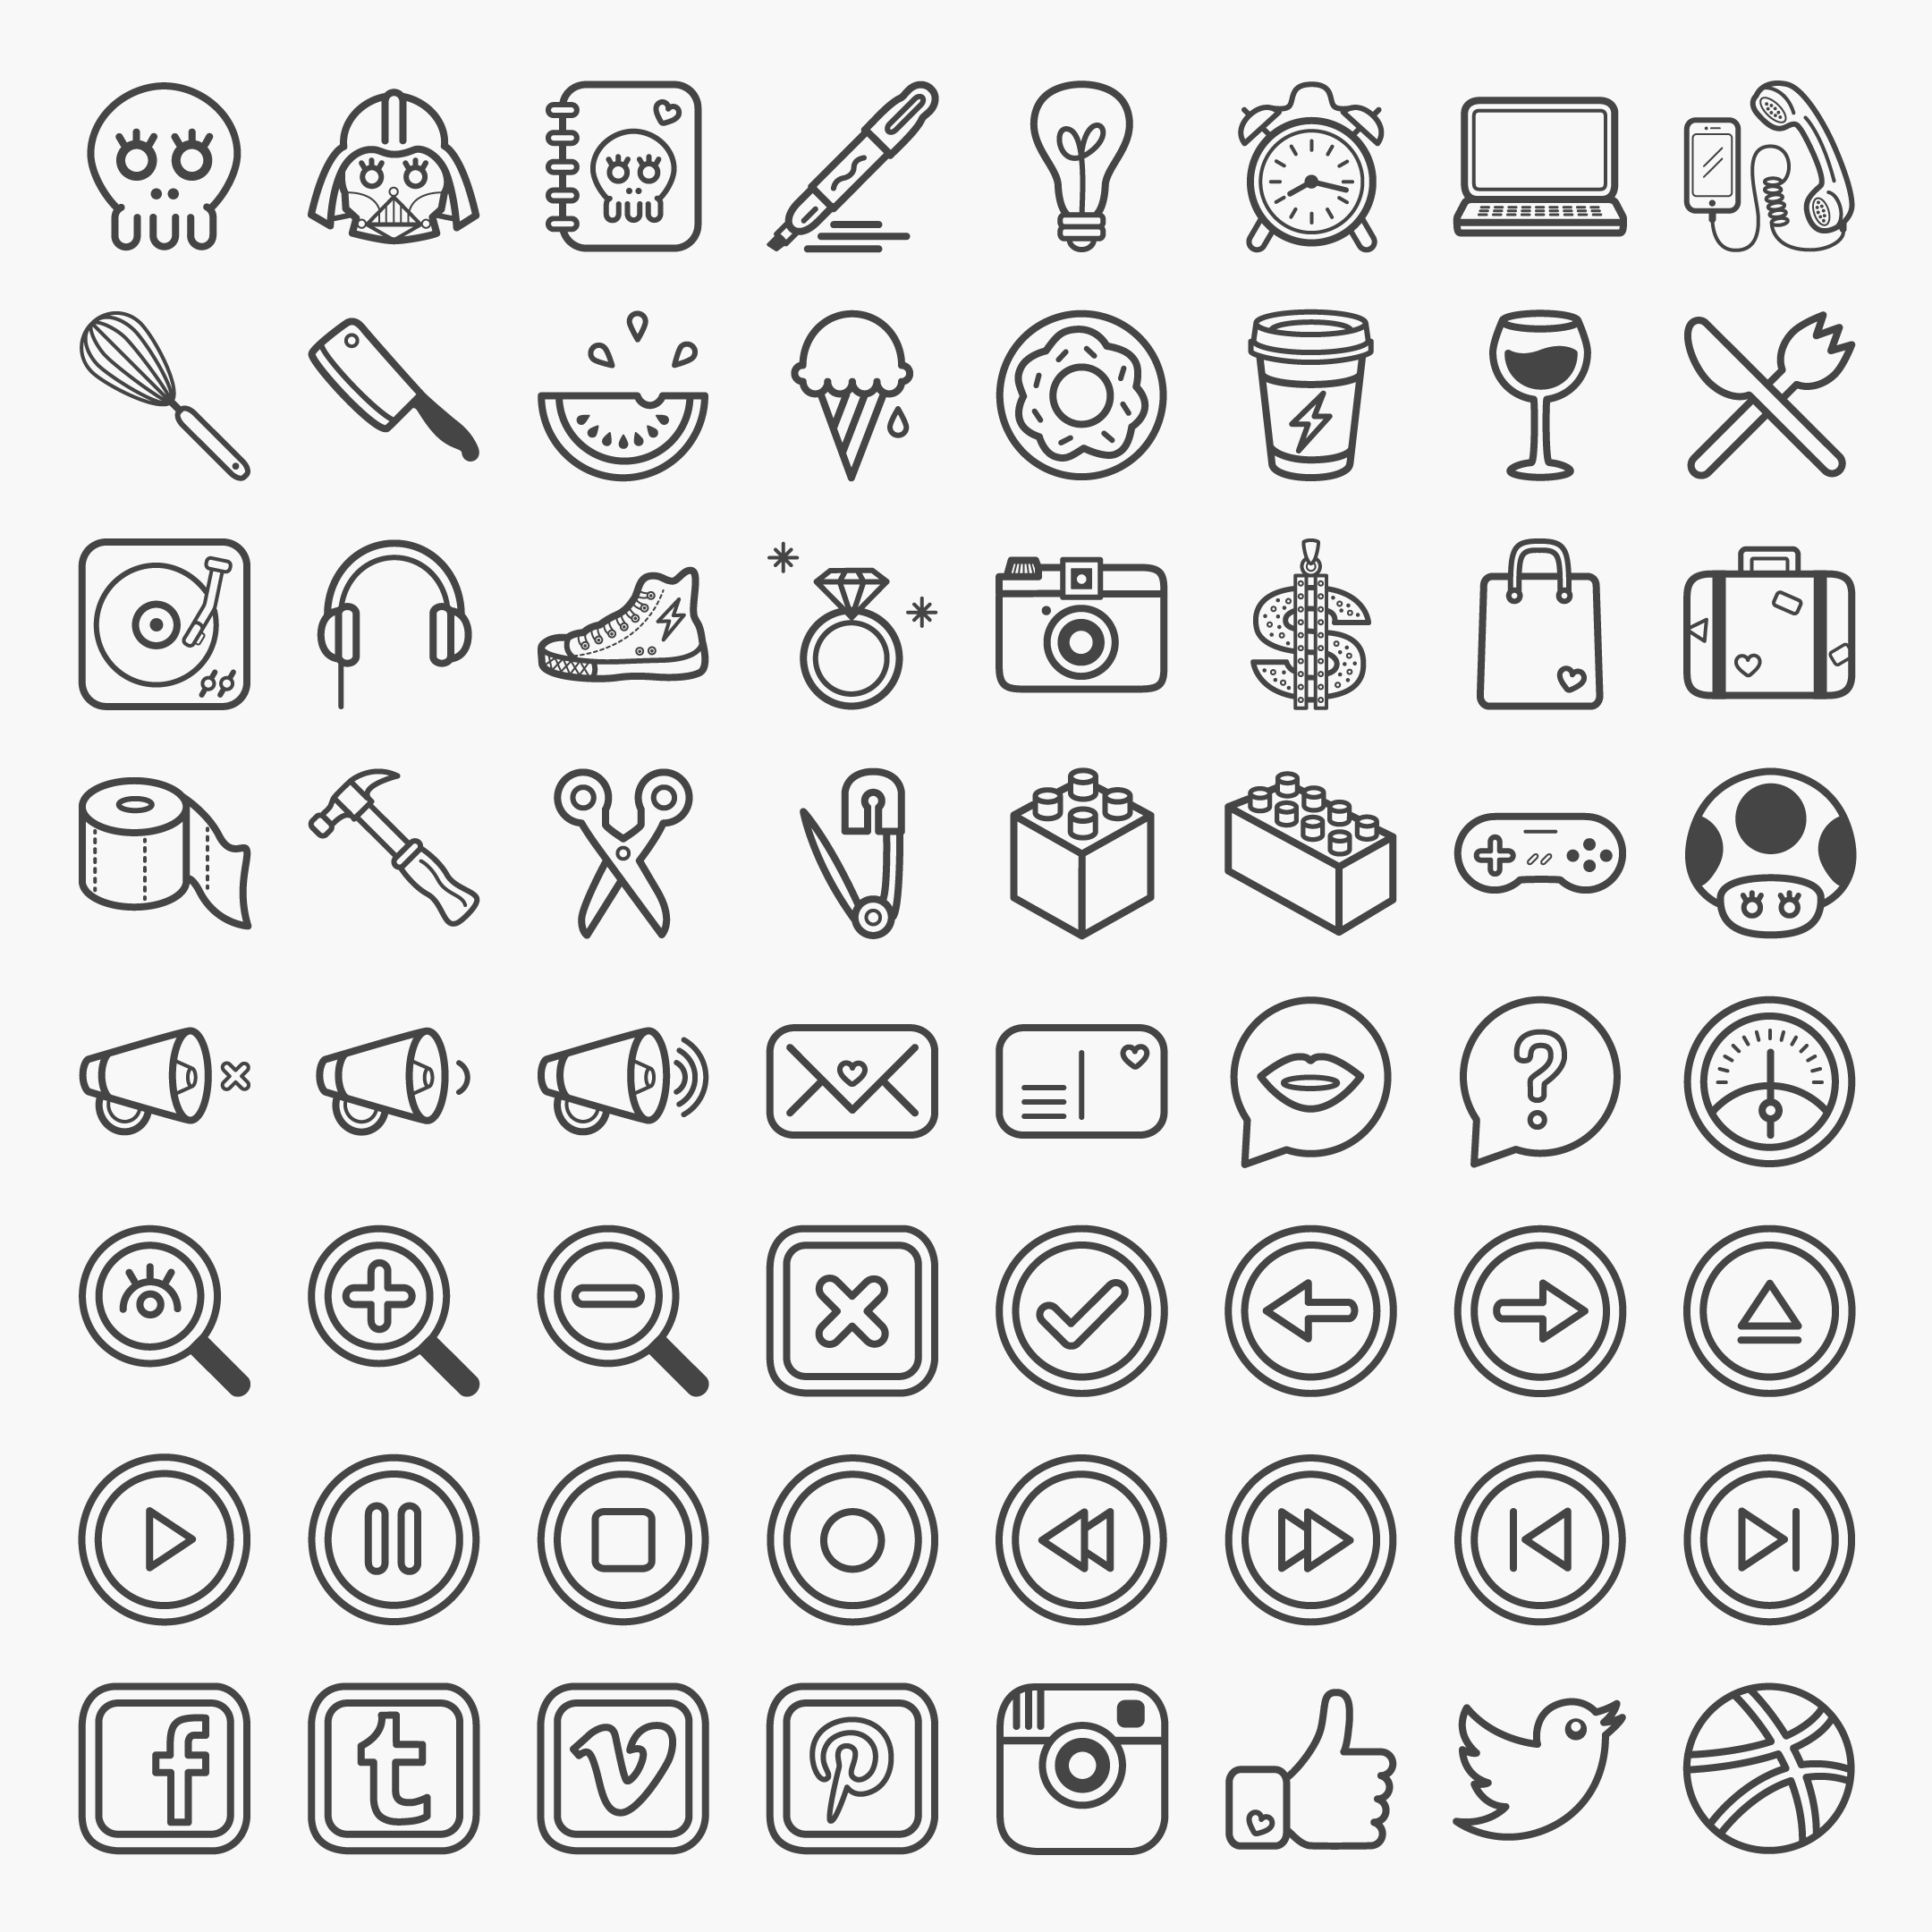 Some icons - Download free PNG web icons - IconsParadise